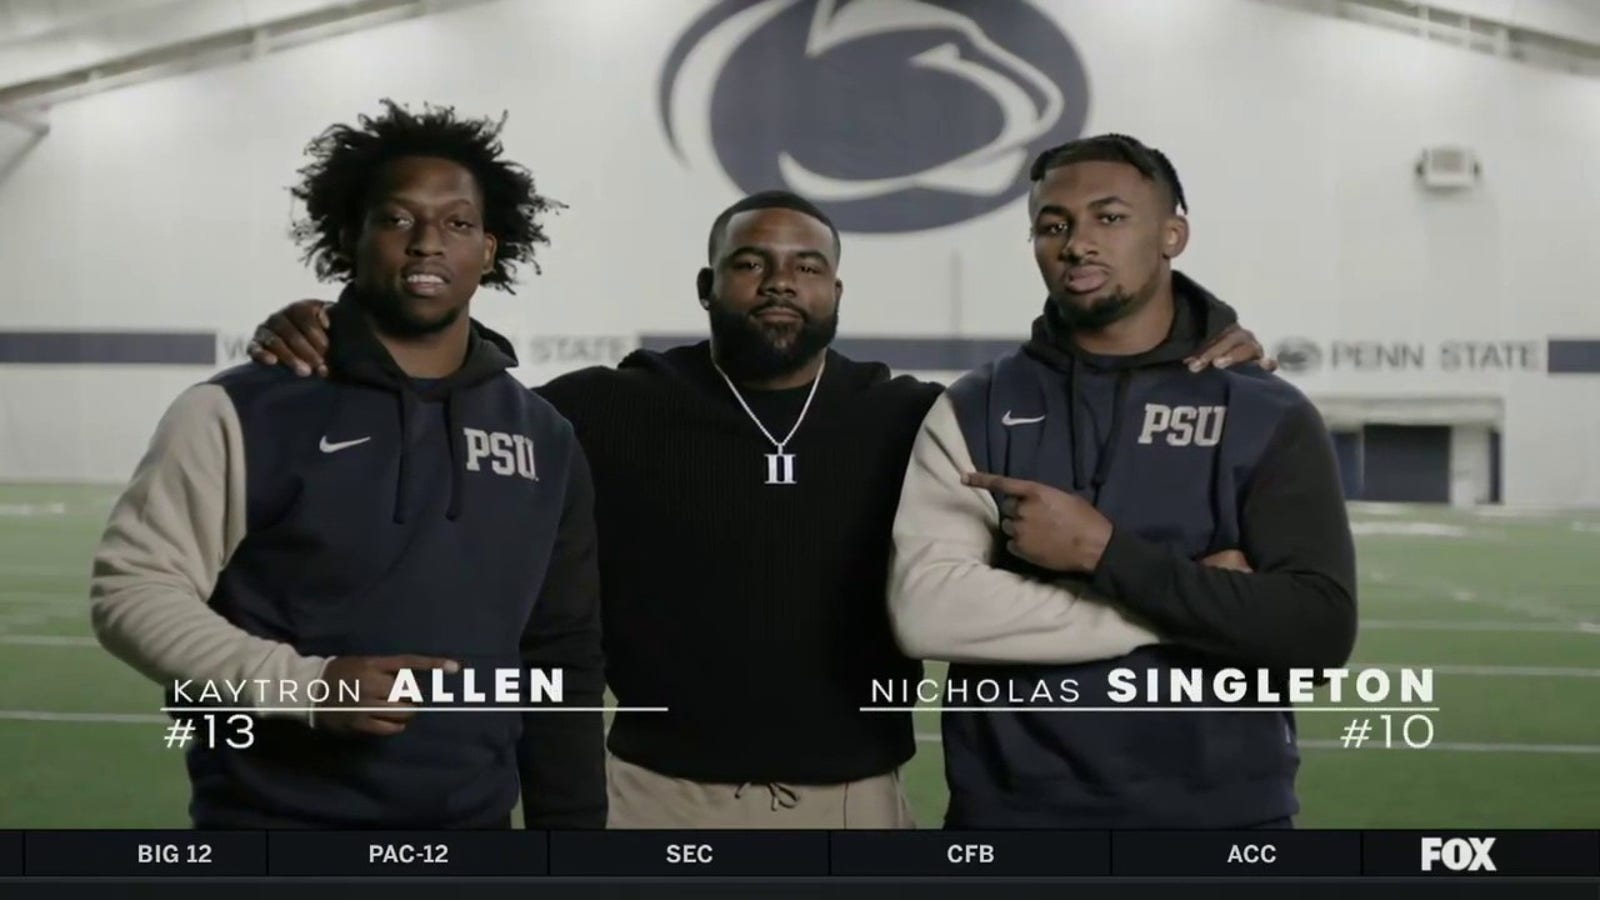 Kaytron Allen and Nicholas Singleton are ready to carry on the legacy of Penn State